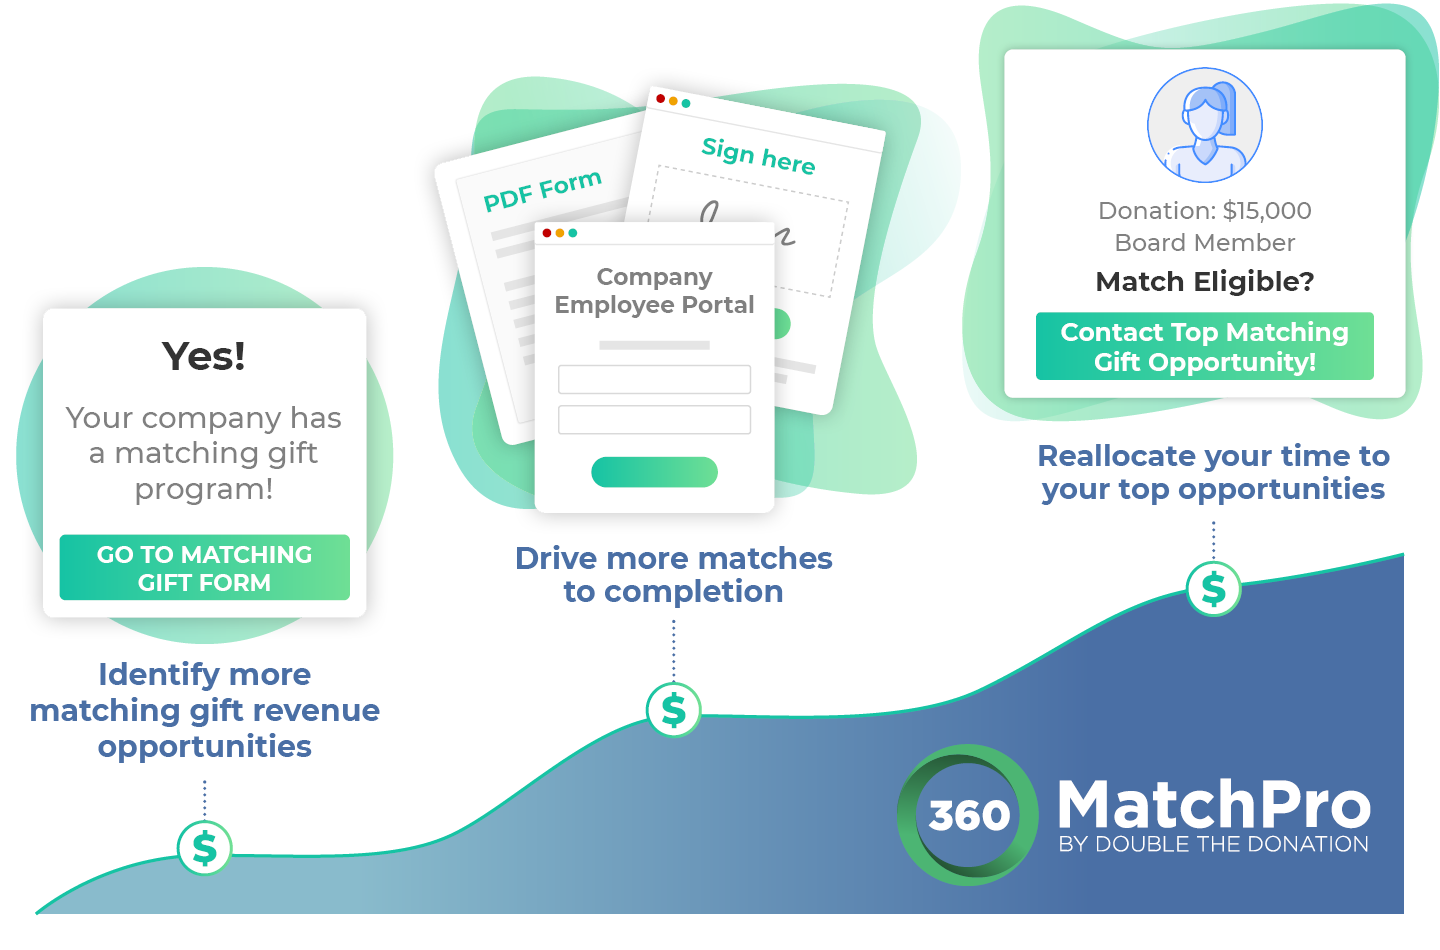 Legacy Plan vs. 360MatchPro software overview